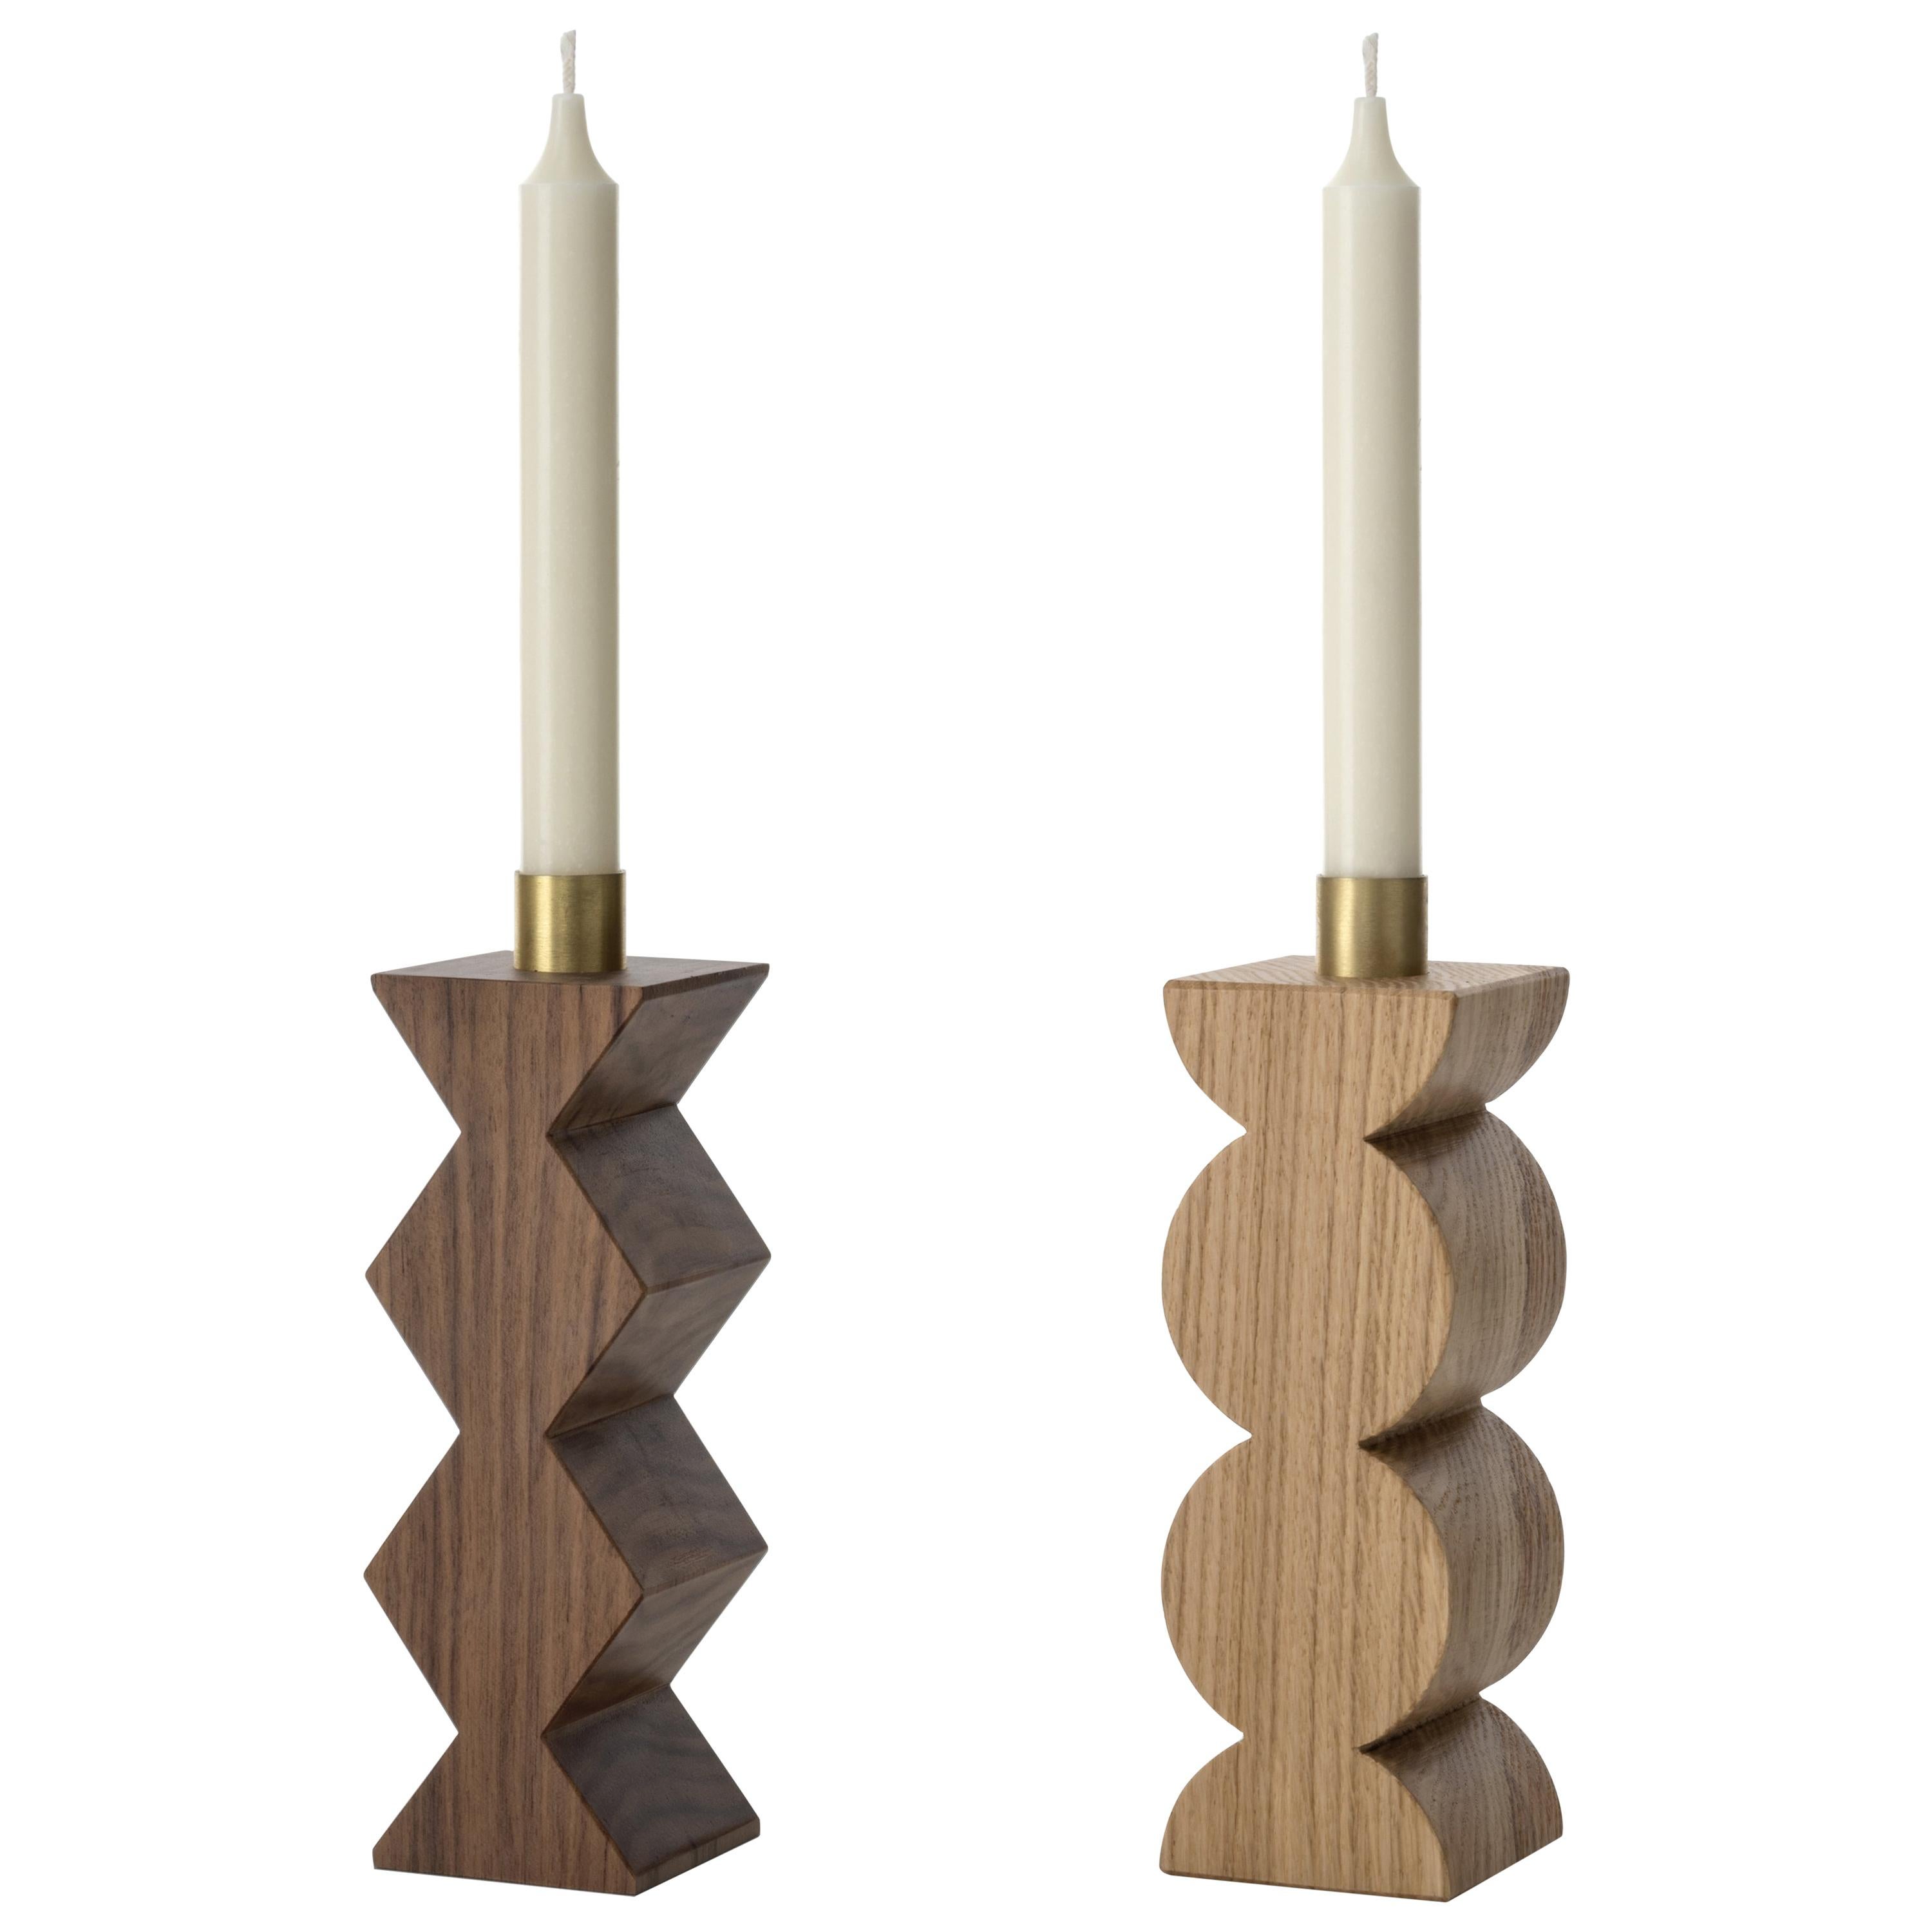 Constantin I + III set of two Candleholders in Solid Oak and Brass with Circles